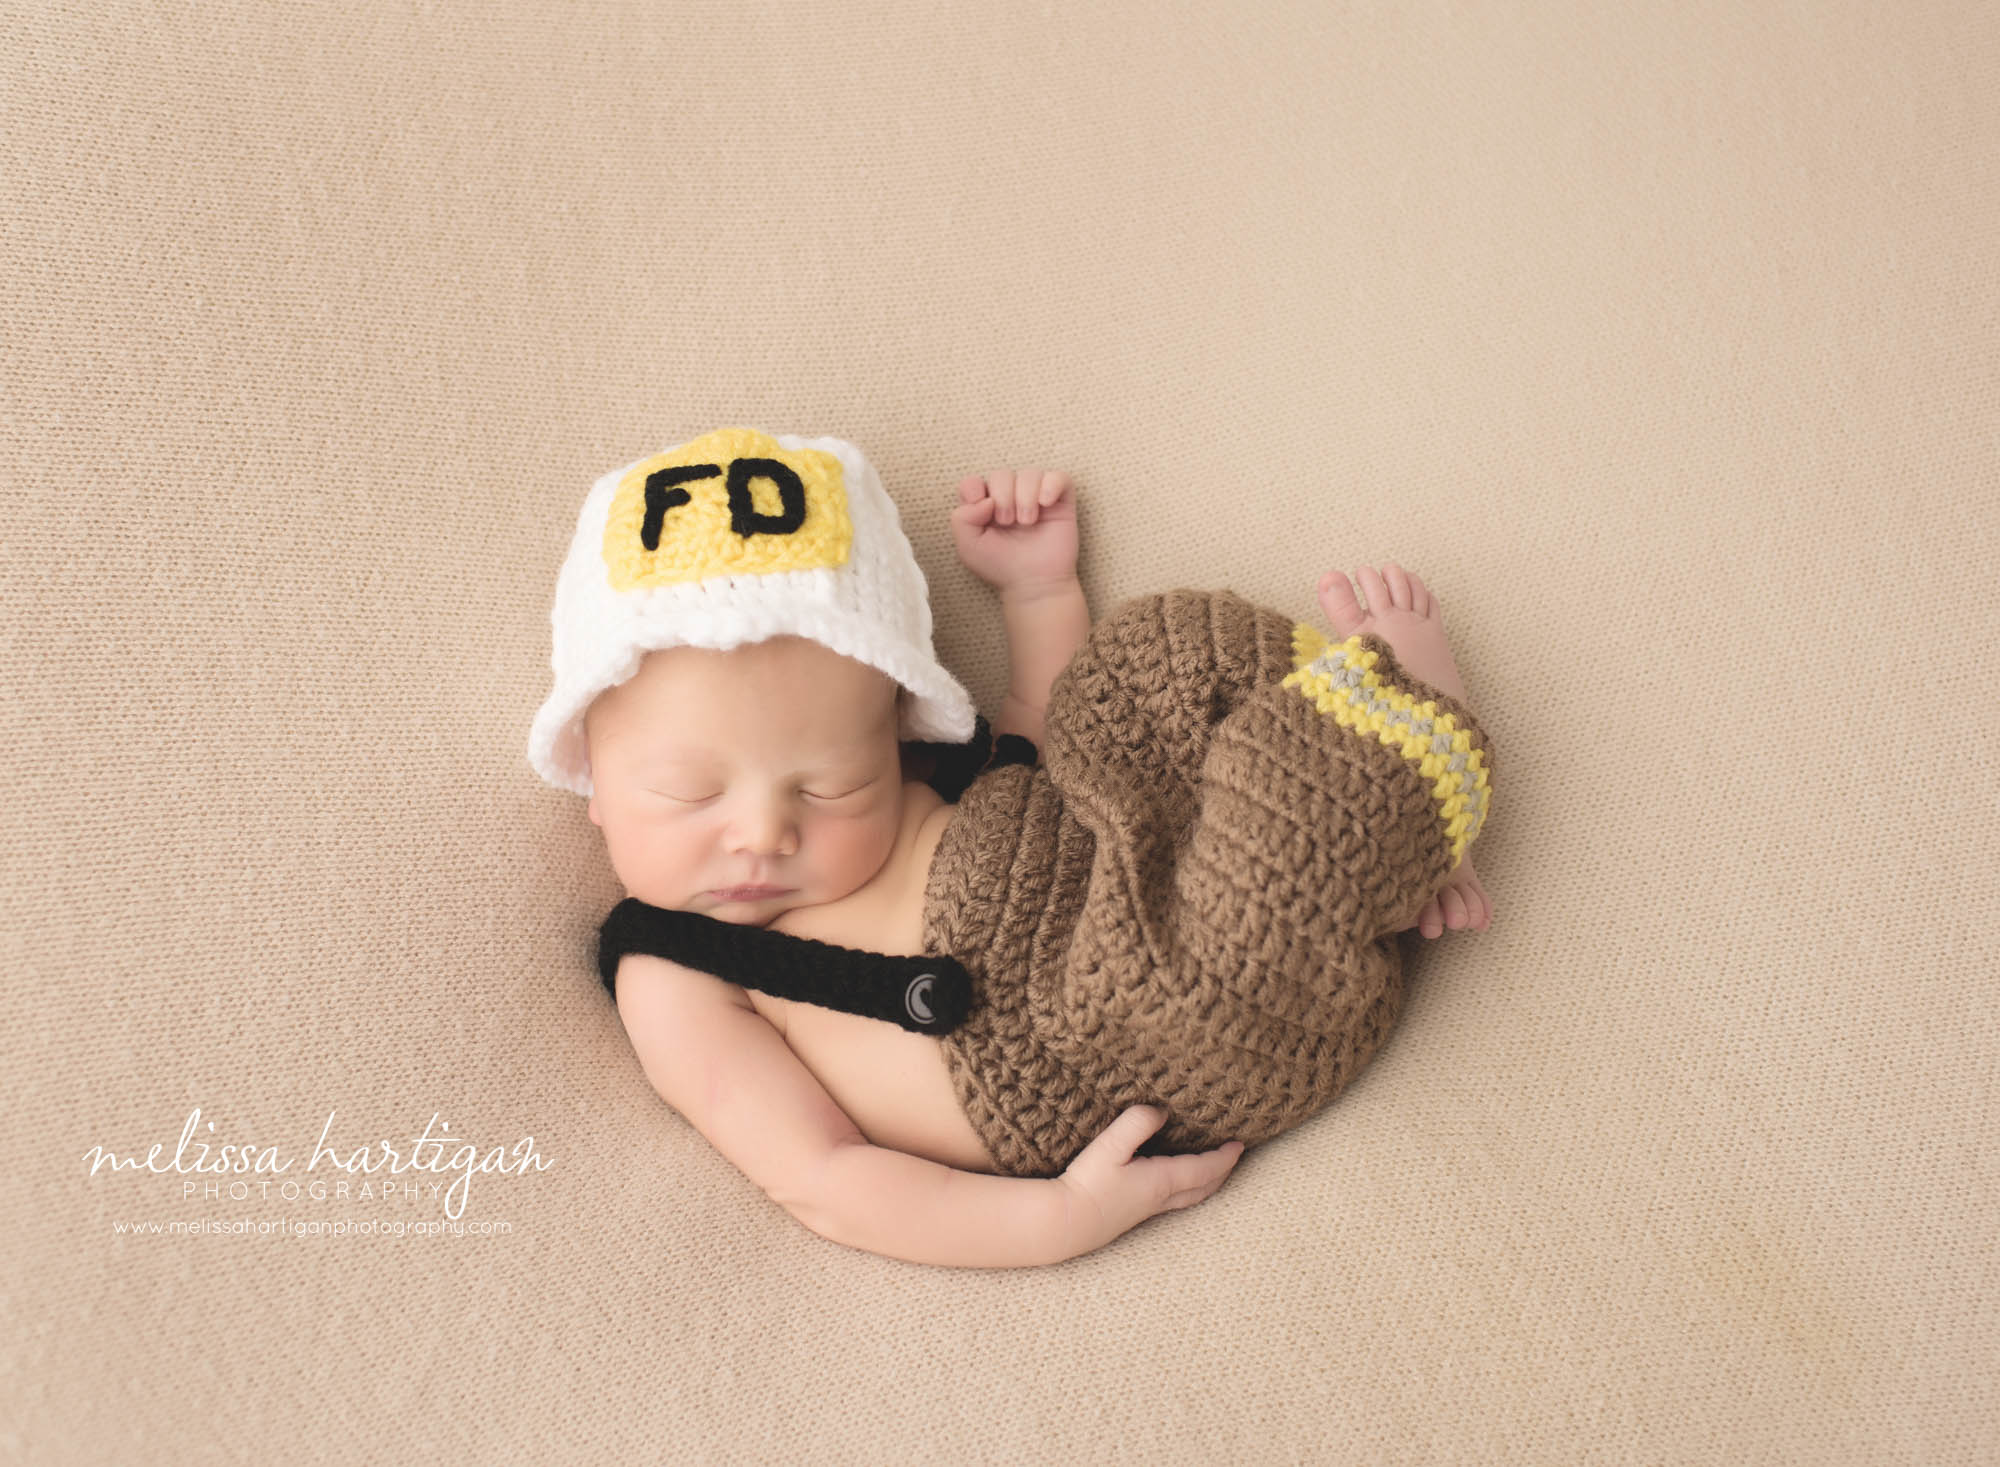 Melissa Hartigan Photography CT Newborn Photographer Braeden Newborn Session baby boy sleeping wearing knit firefighter outfit and hat